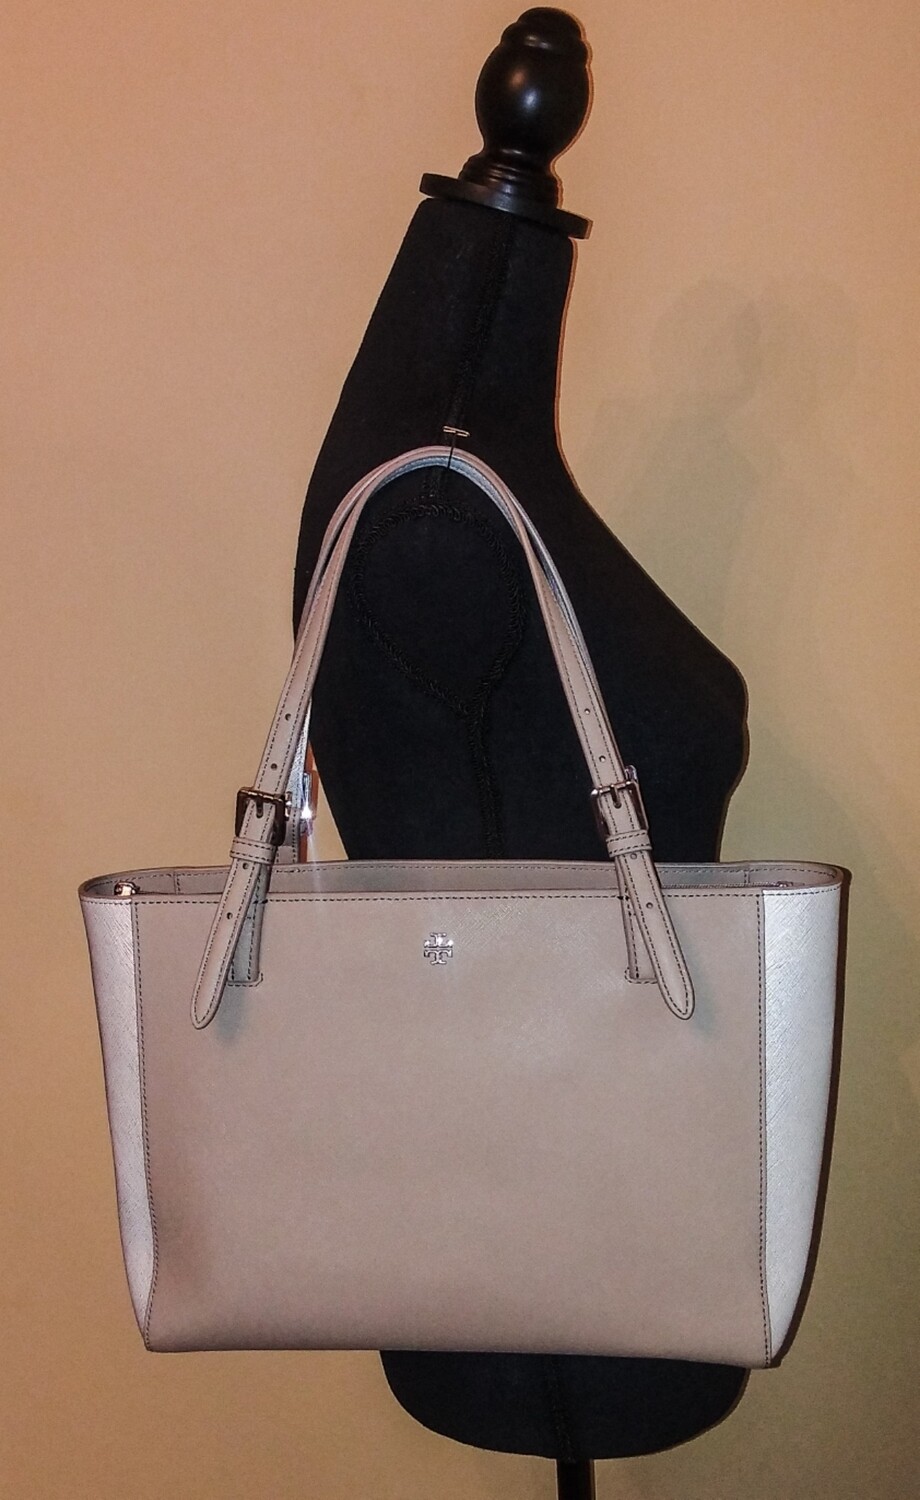 Tory Burch leather tote